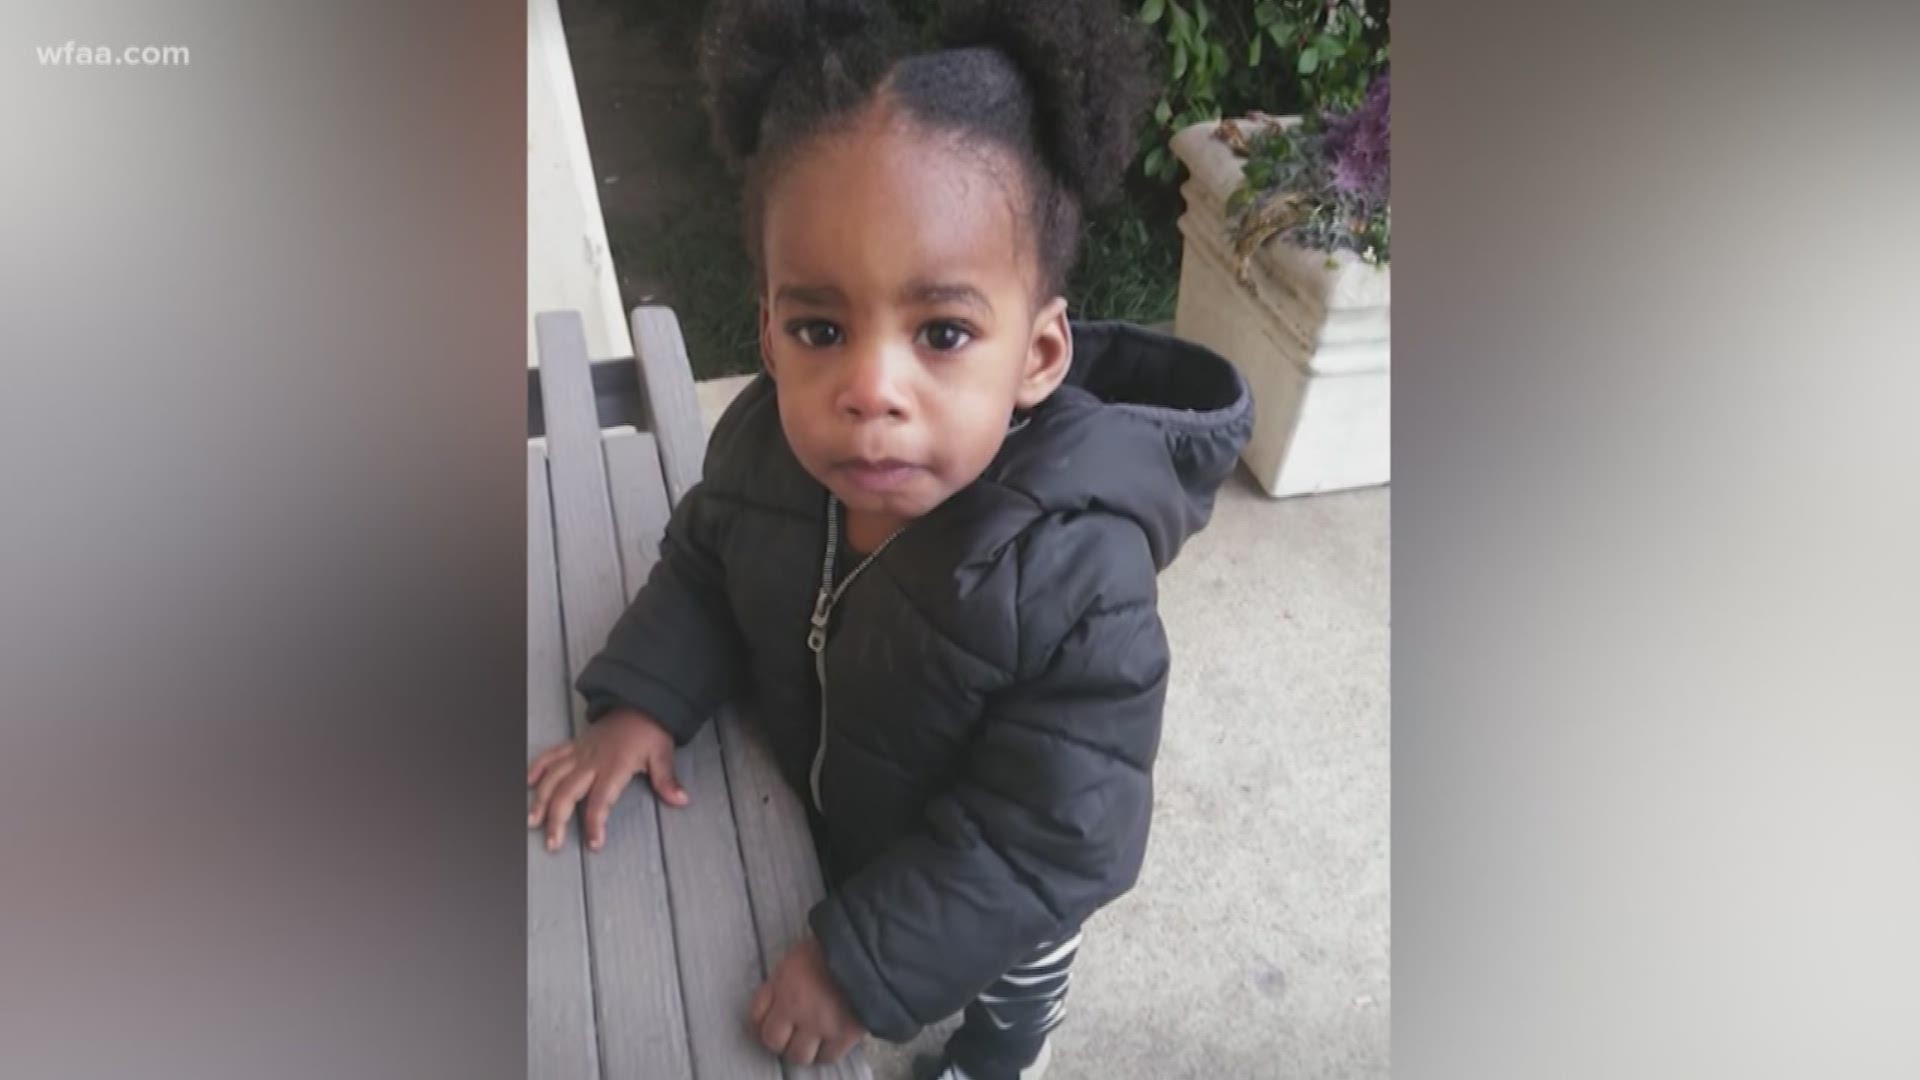 A man accused in the death of an 18-month-old boy told police he would often tightly swaddle the toddler because the boy once "made a mess" in the middle of the night with ketchup packets, arrest records show.